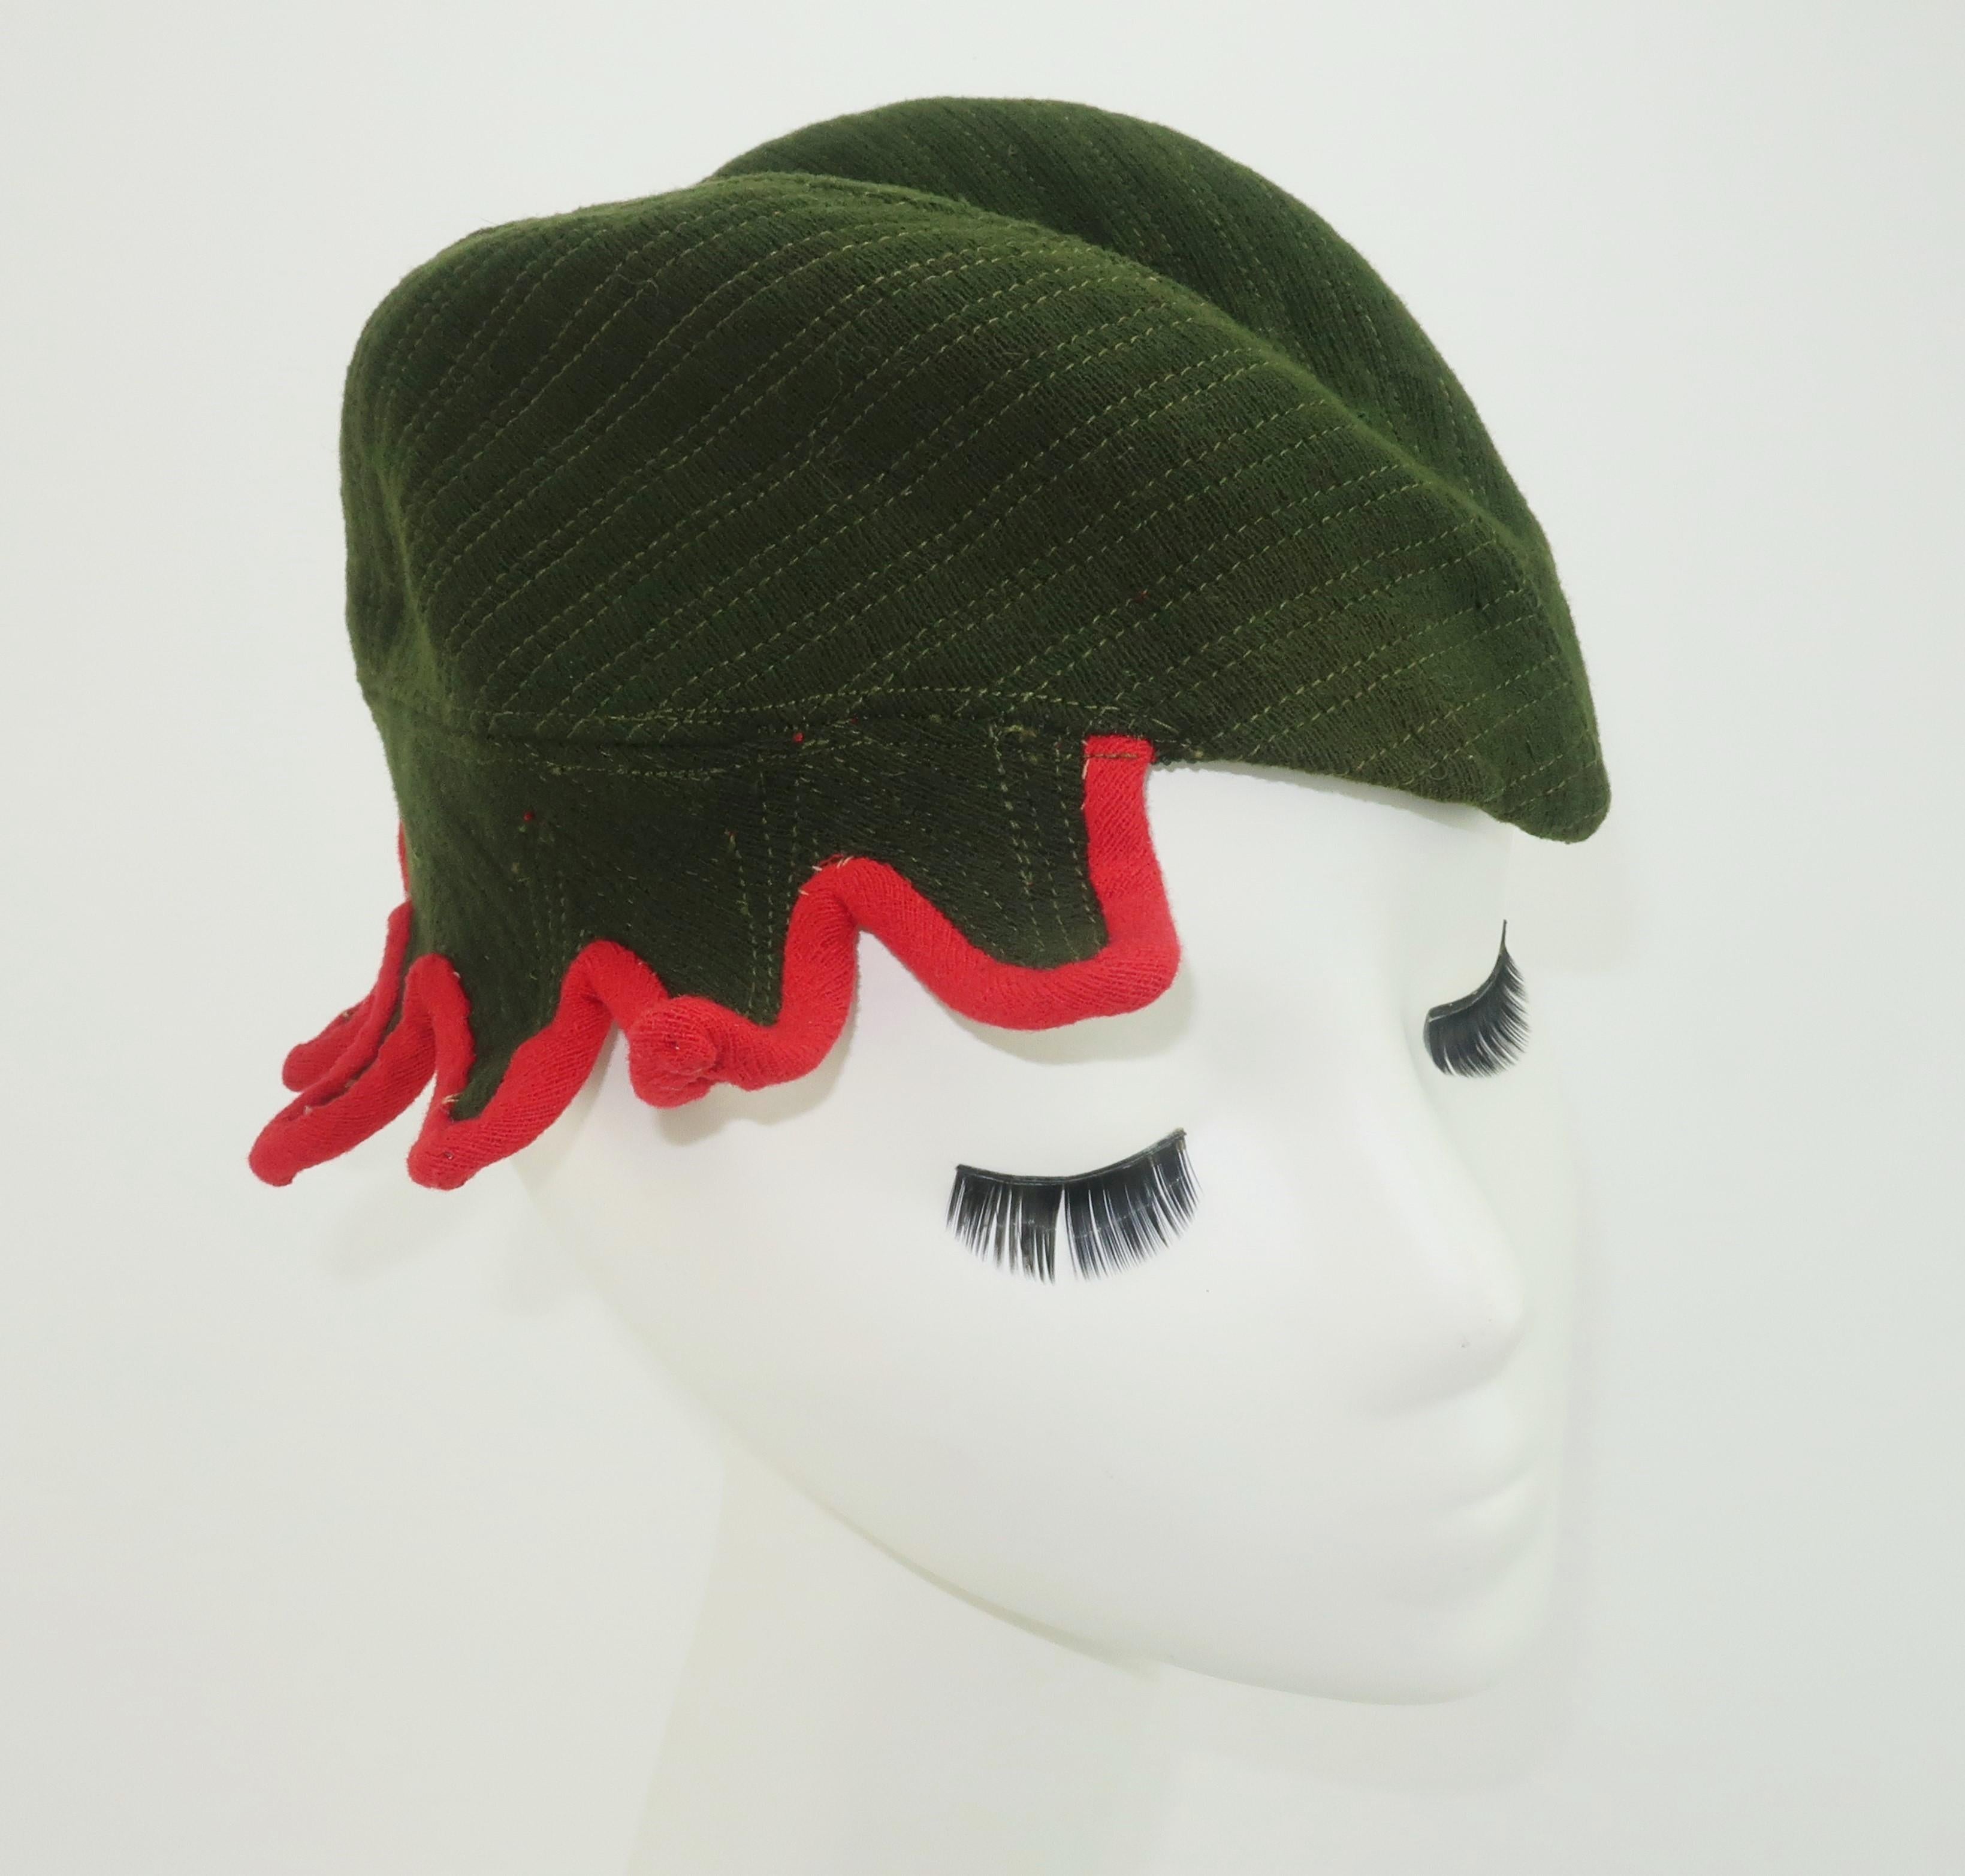 A 1940's army green wool cap with quilted stitching and a whimsical red trim by Atlanta milliner, Ella Buchanan Gunn.  Ms. Gunn started her business in 1899 and was known throughout the South for her unique and stylish designs.  This unusual topper